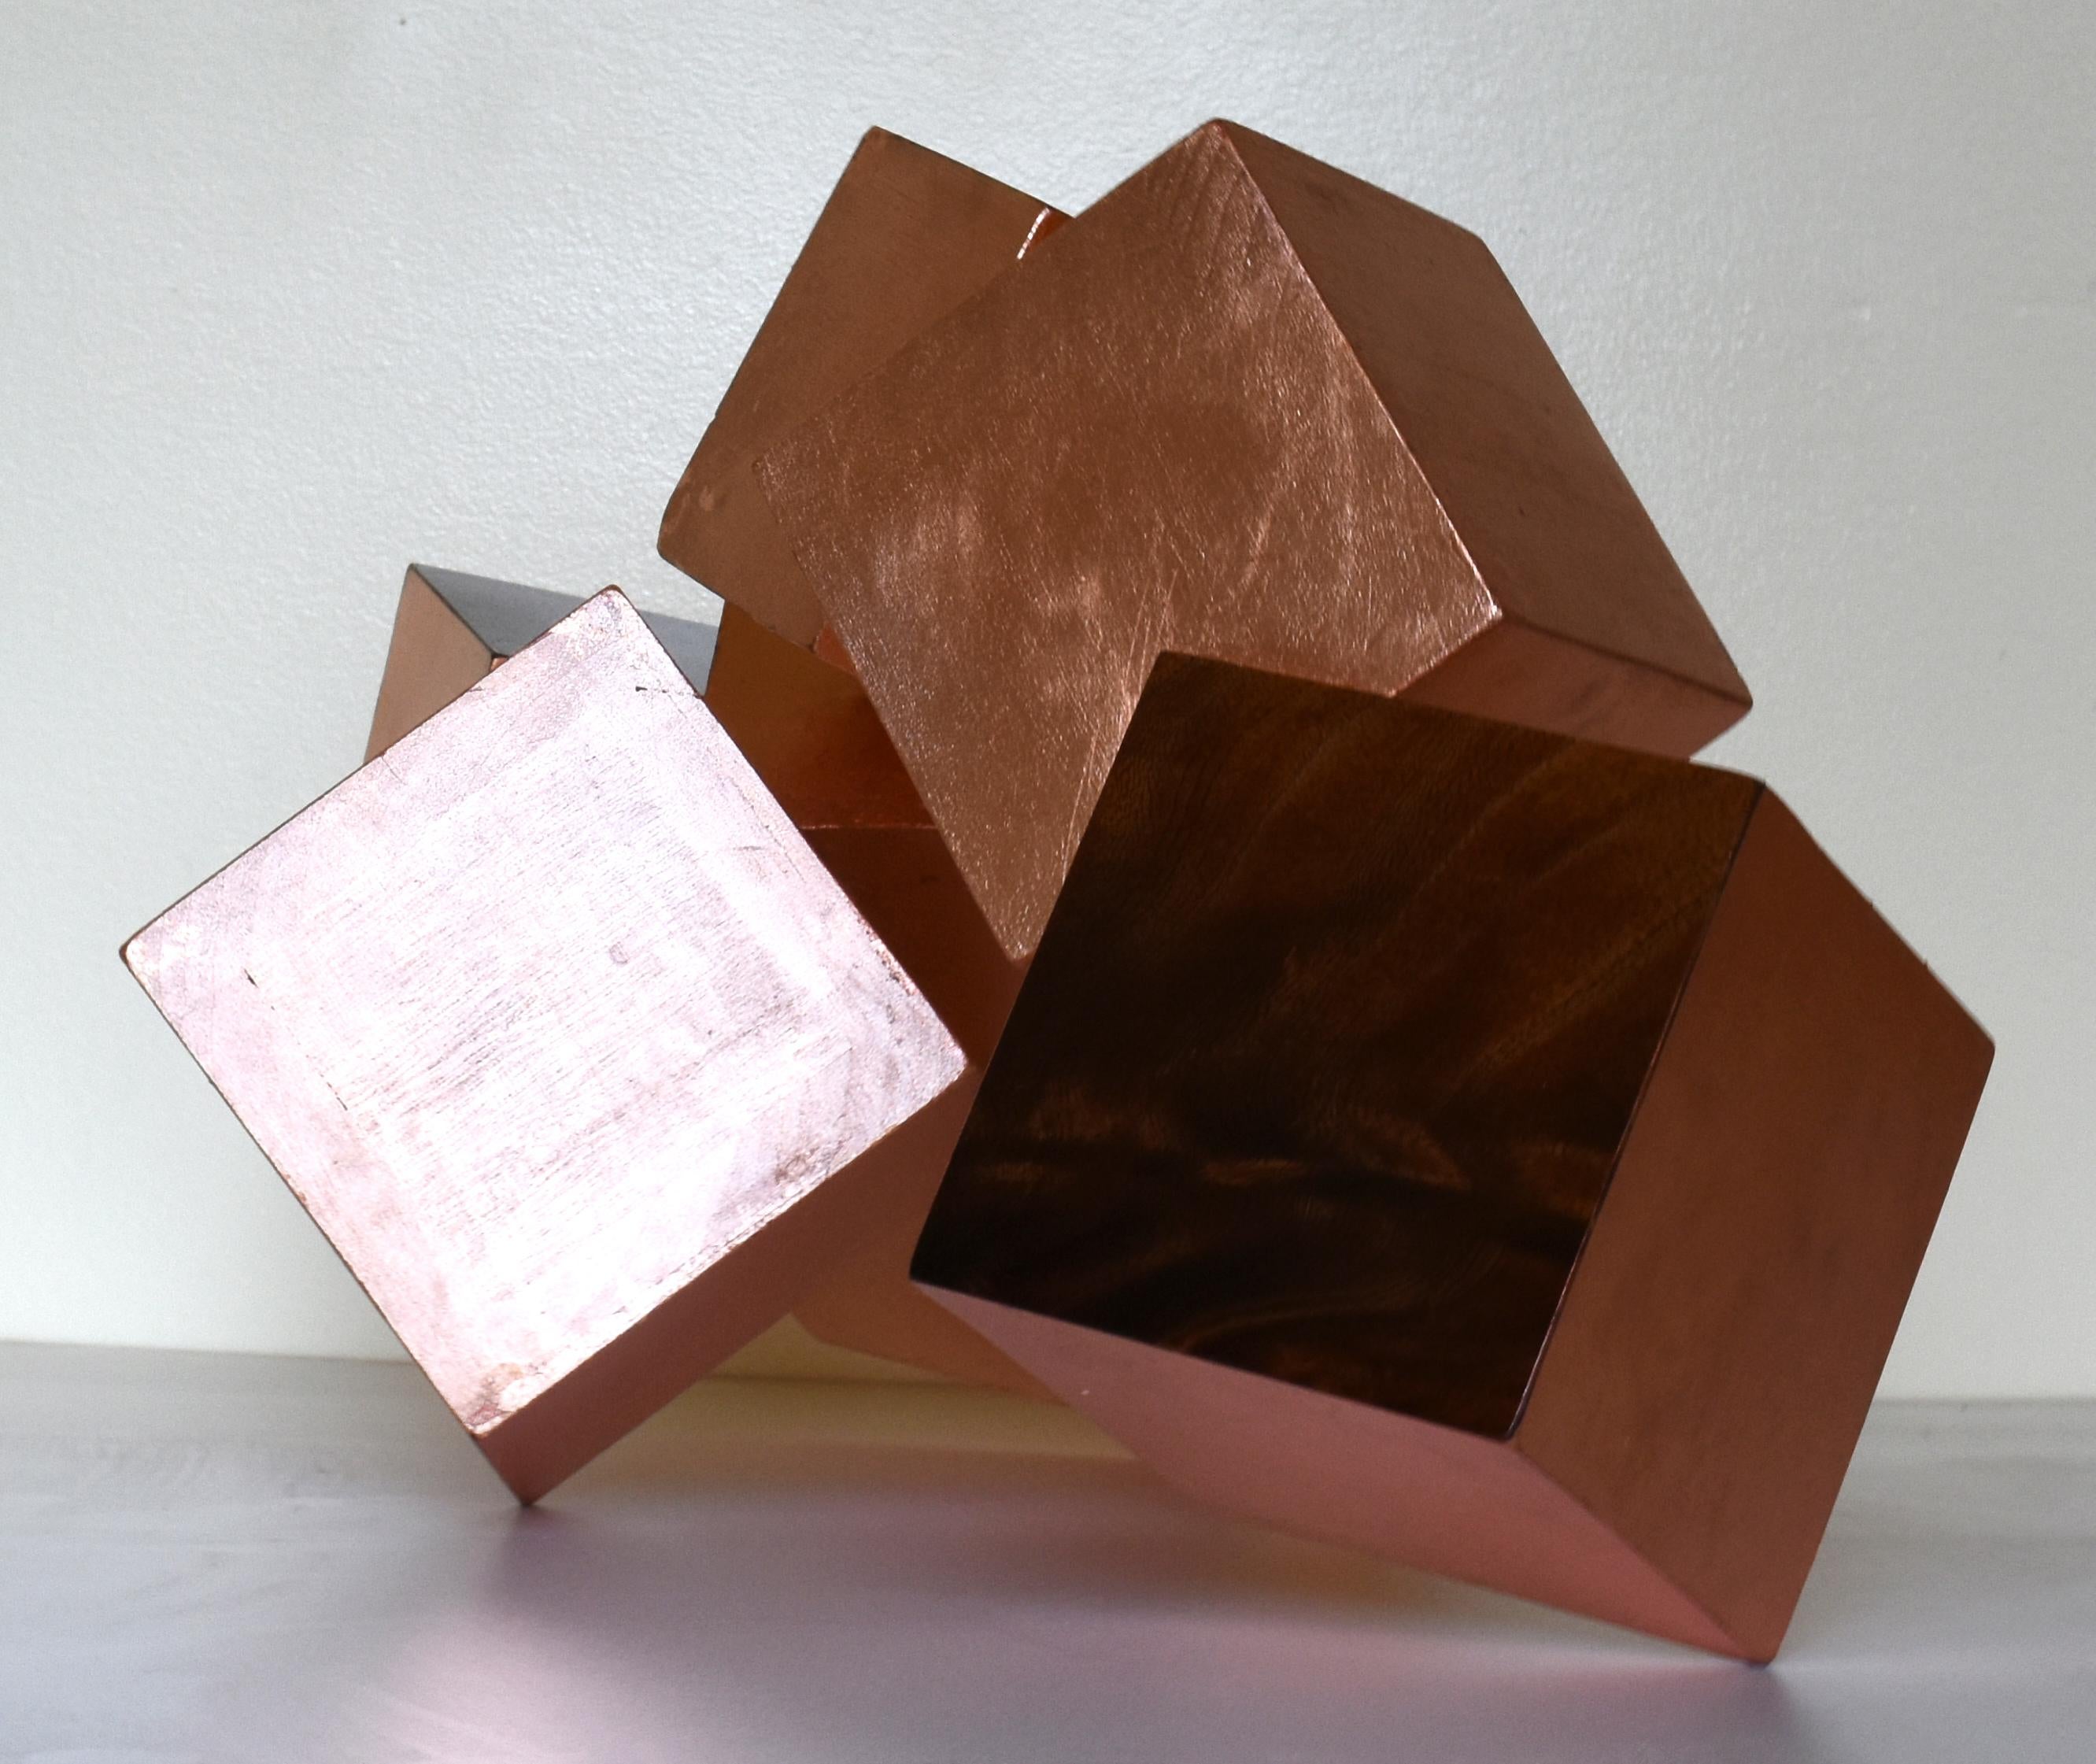 Copper and Mahogany Pyrite (exotic wood, metallic, cubic, table top sculpture) - Brown Abstract Sculpture by Chloe Hedden